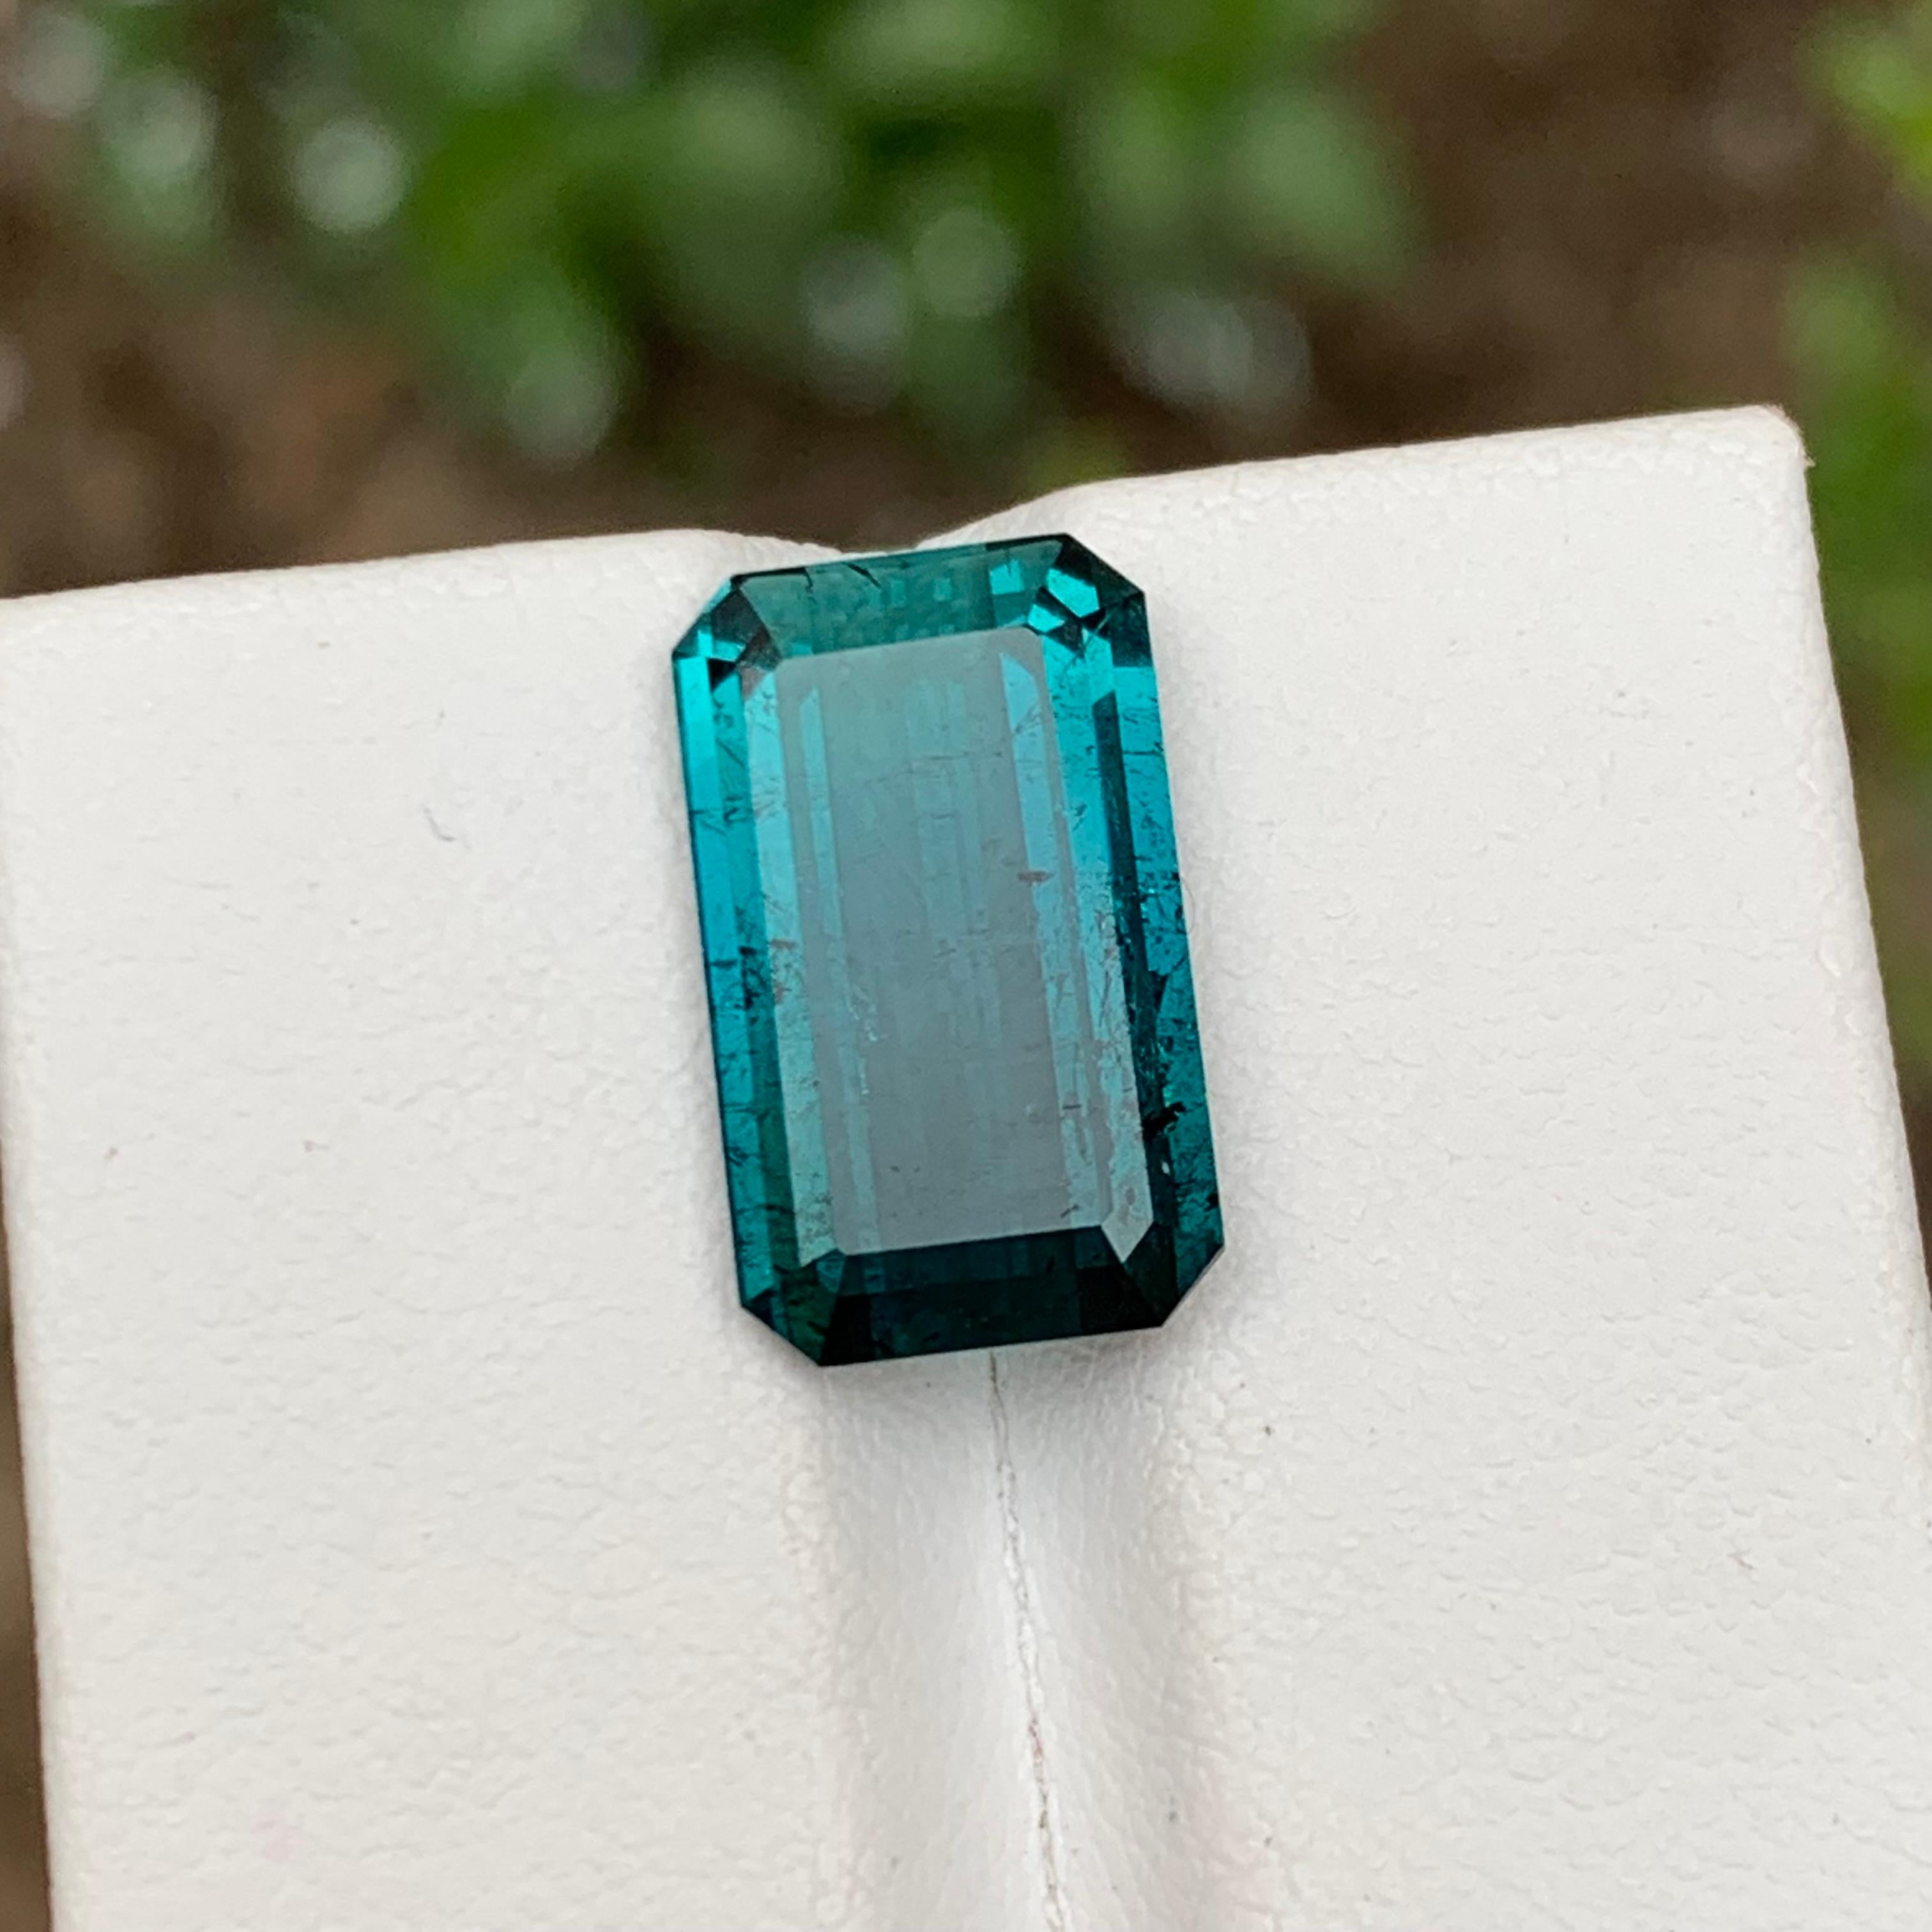 GEMSTONE TYPE: Tourmaline
PIECE(S): 1
WEIGHT: 6.60 Carats
SHAPE: Emerald Cut
SIZE (MM): 15.30 x 9.13 x 4.87
COLOR: Vivid Neon Blue
CLARITY: Moderately Included 
TREATMENT: None
ORIGIN: Afghanistan
CERTIFICATE: On demand

Introducing our exquisite